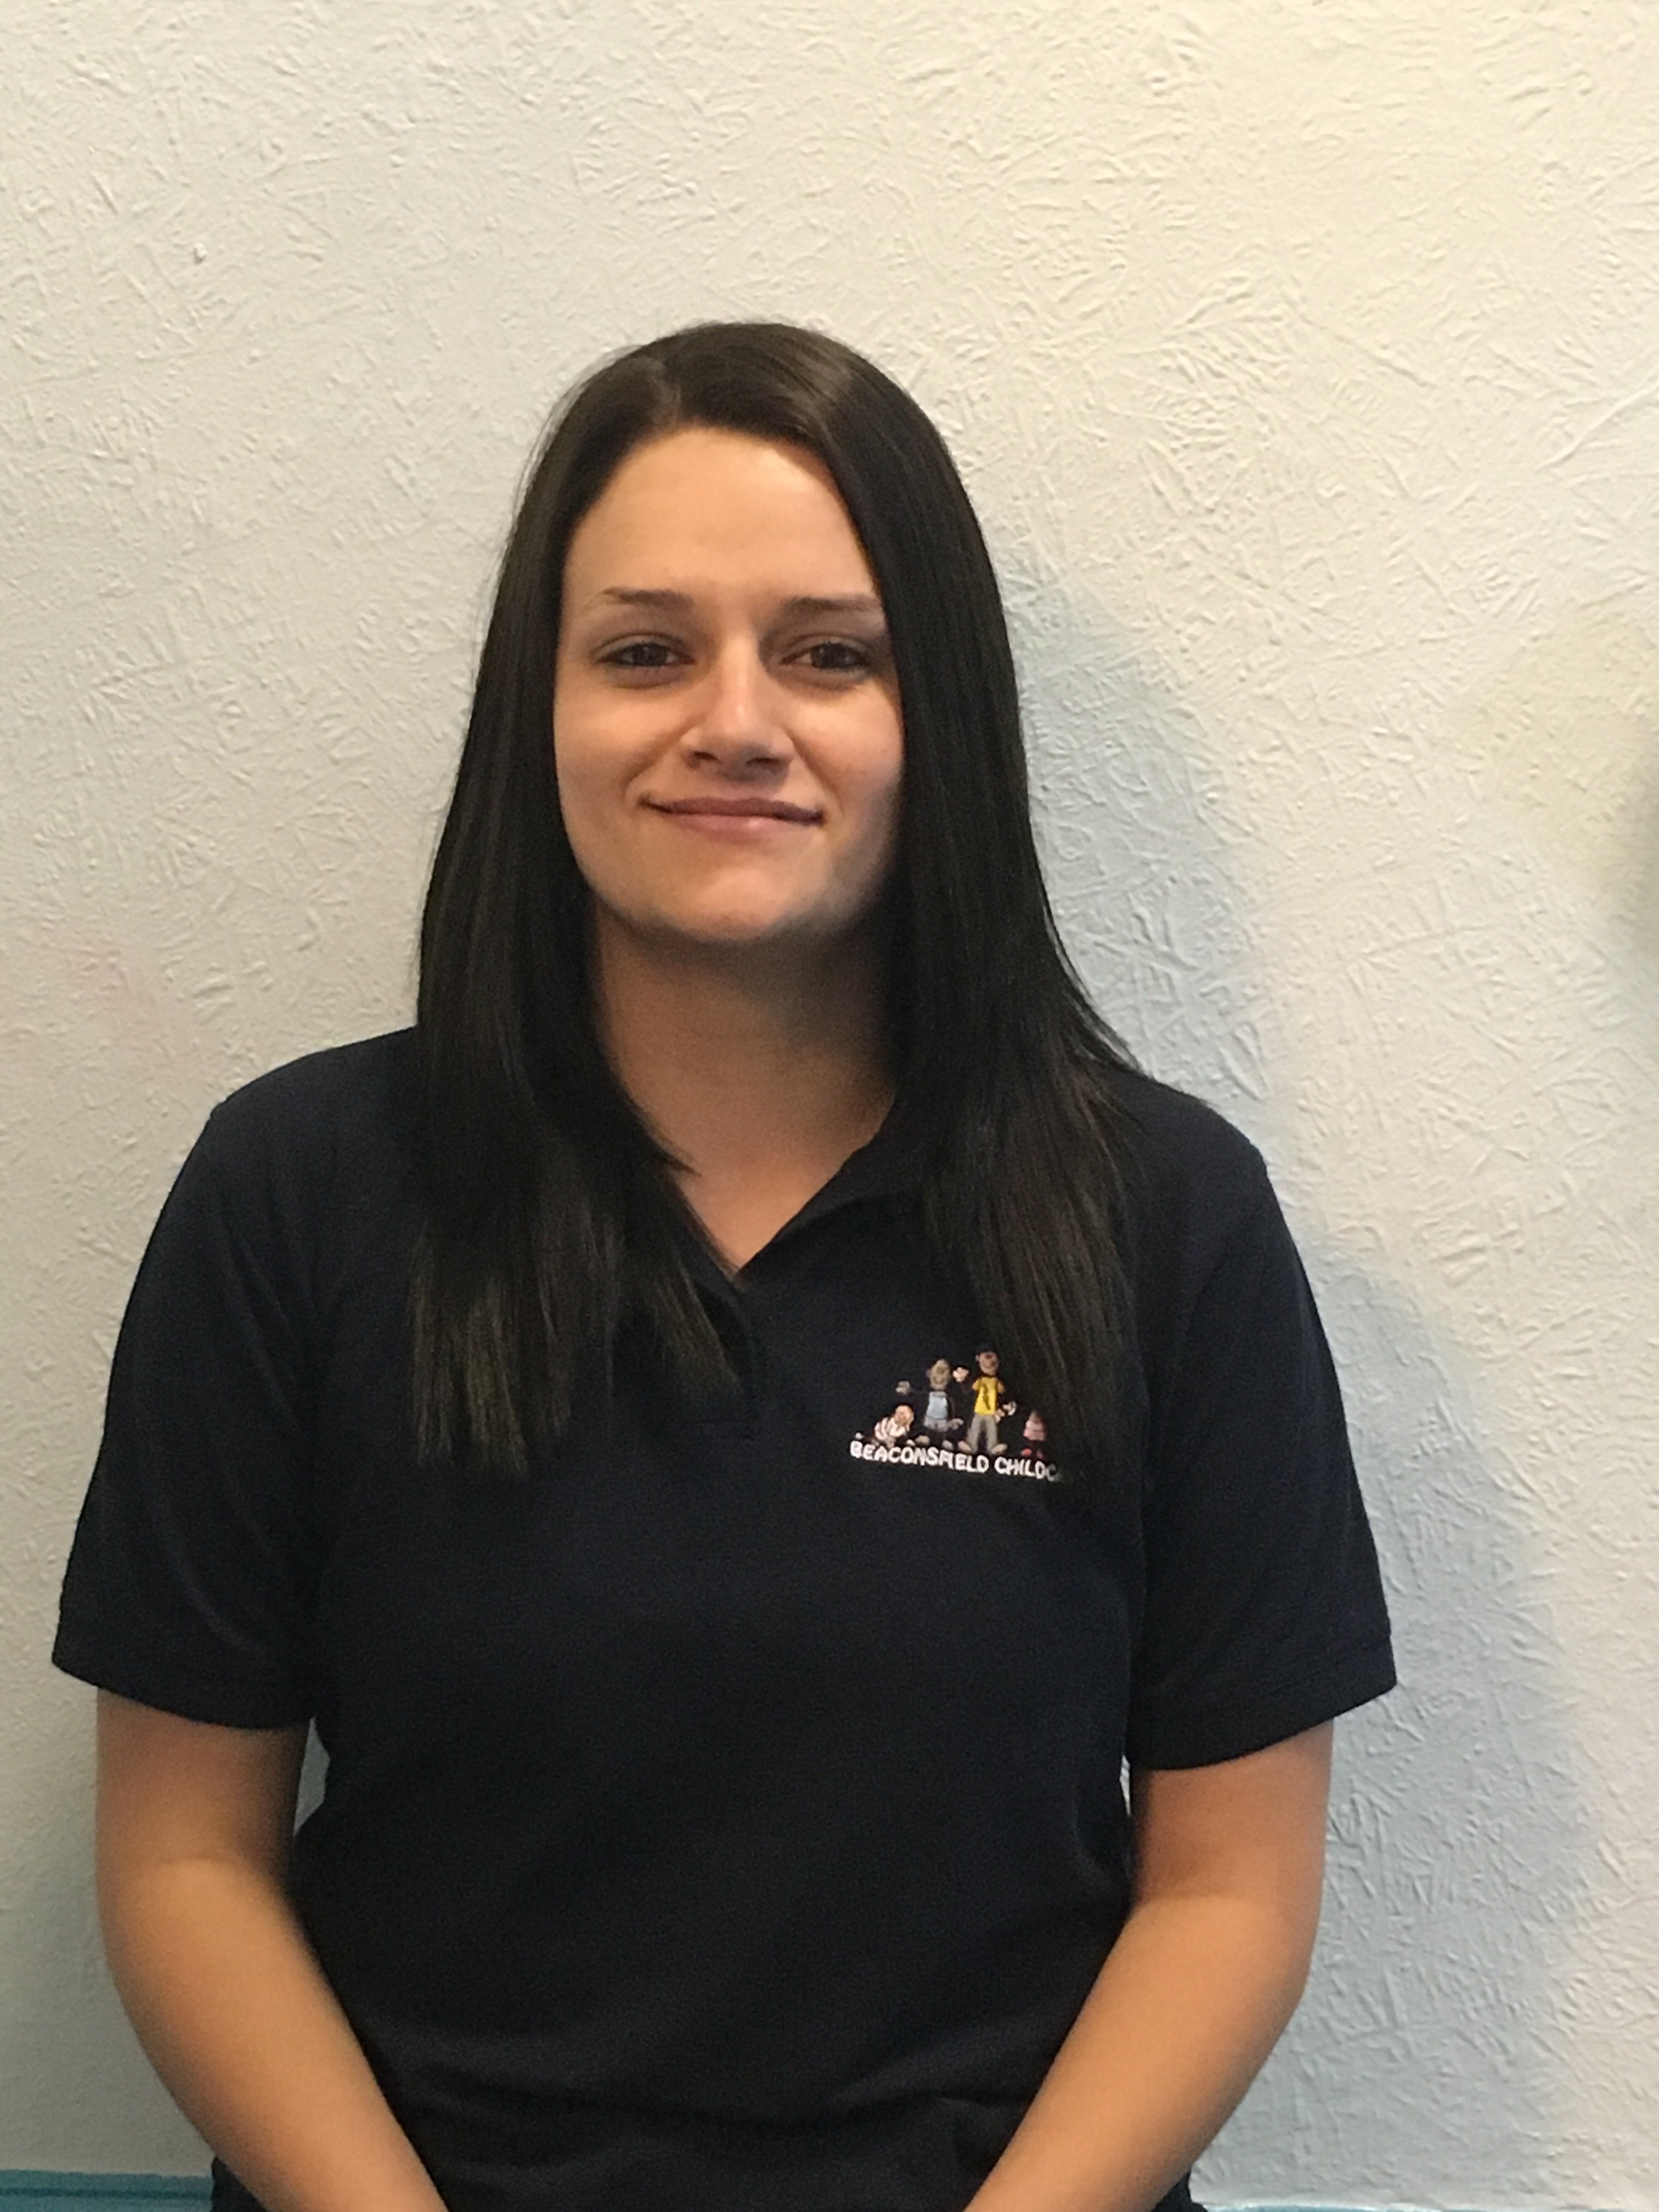 Meet the Team at Beaconsfield Childcare – Kelly